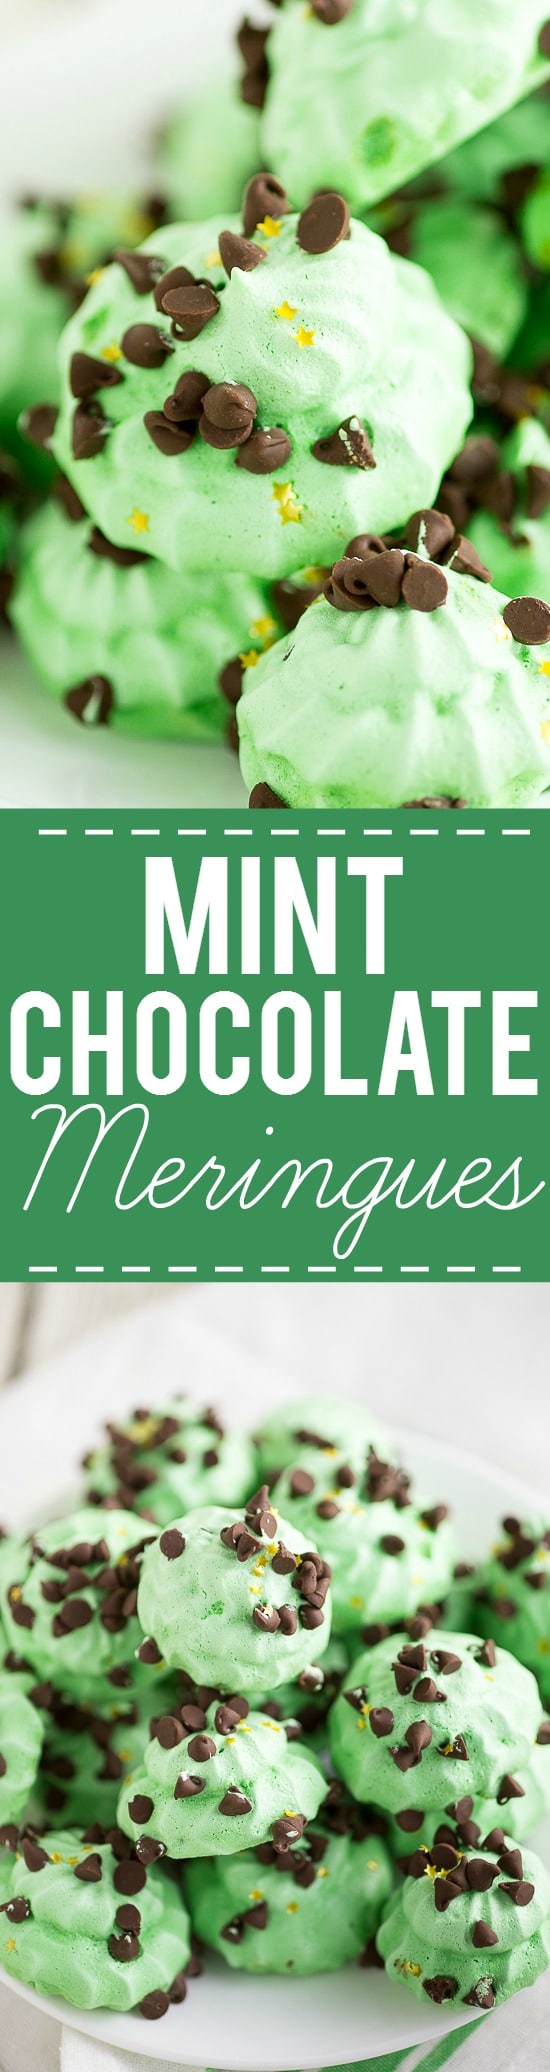 Mint Chocolate Meringues Recipe - Light and fluffy with the perfect amount of crispy, these cool and minty Mint Chocolate Meringues are perfect for mint chocolate lovers. Festive for Christmas or St Patrick's Day too!